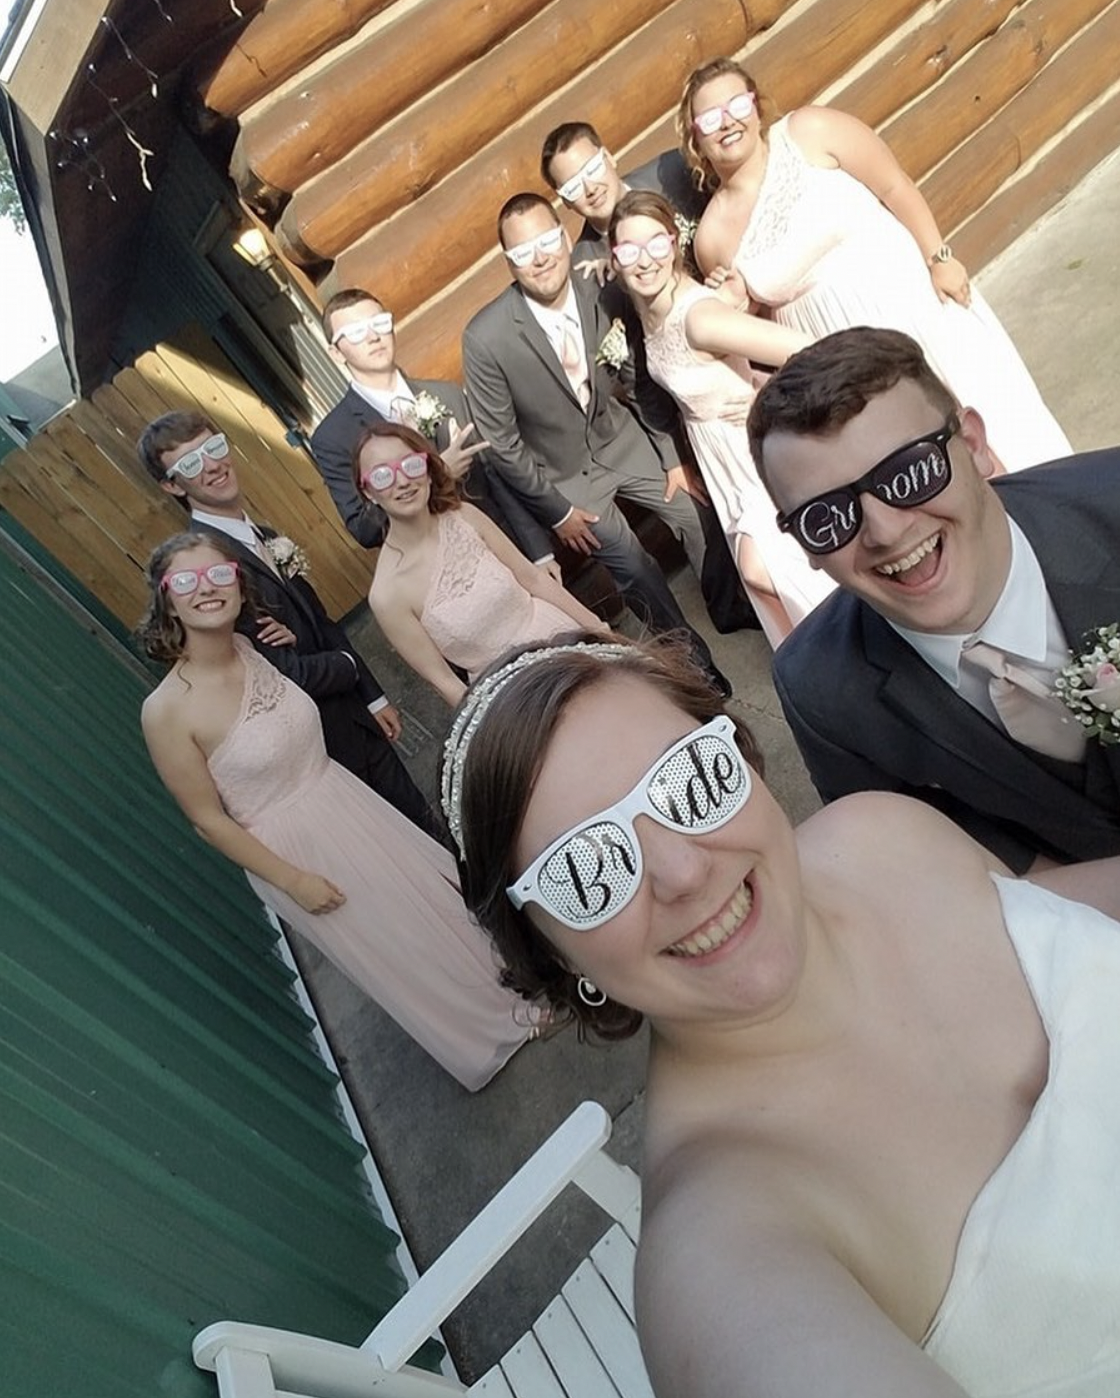 Bride and groom smile for selfie with their wedding parties where bride and groom sunglasses